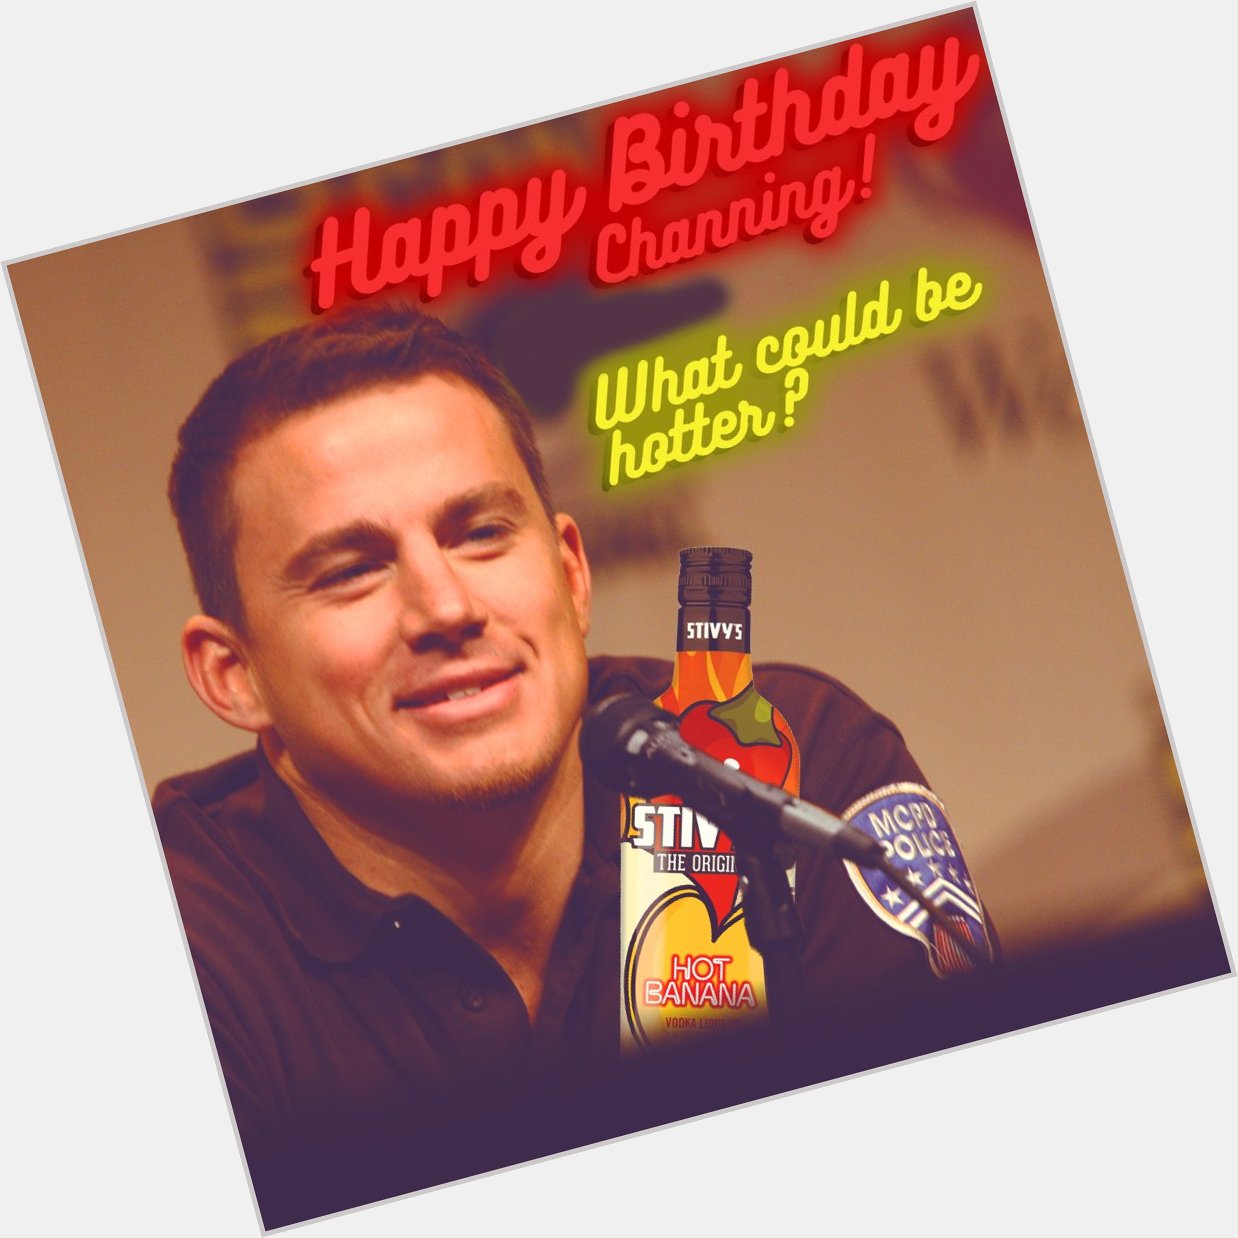 Happy Birthday to Channing Tatum, the hottest banana of them all!
 